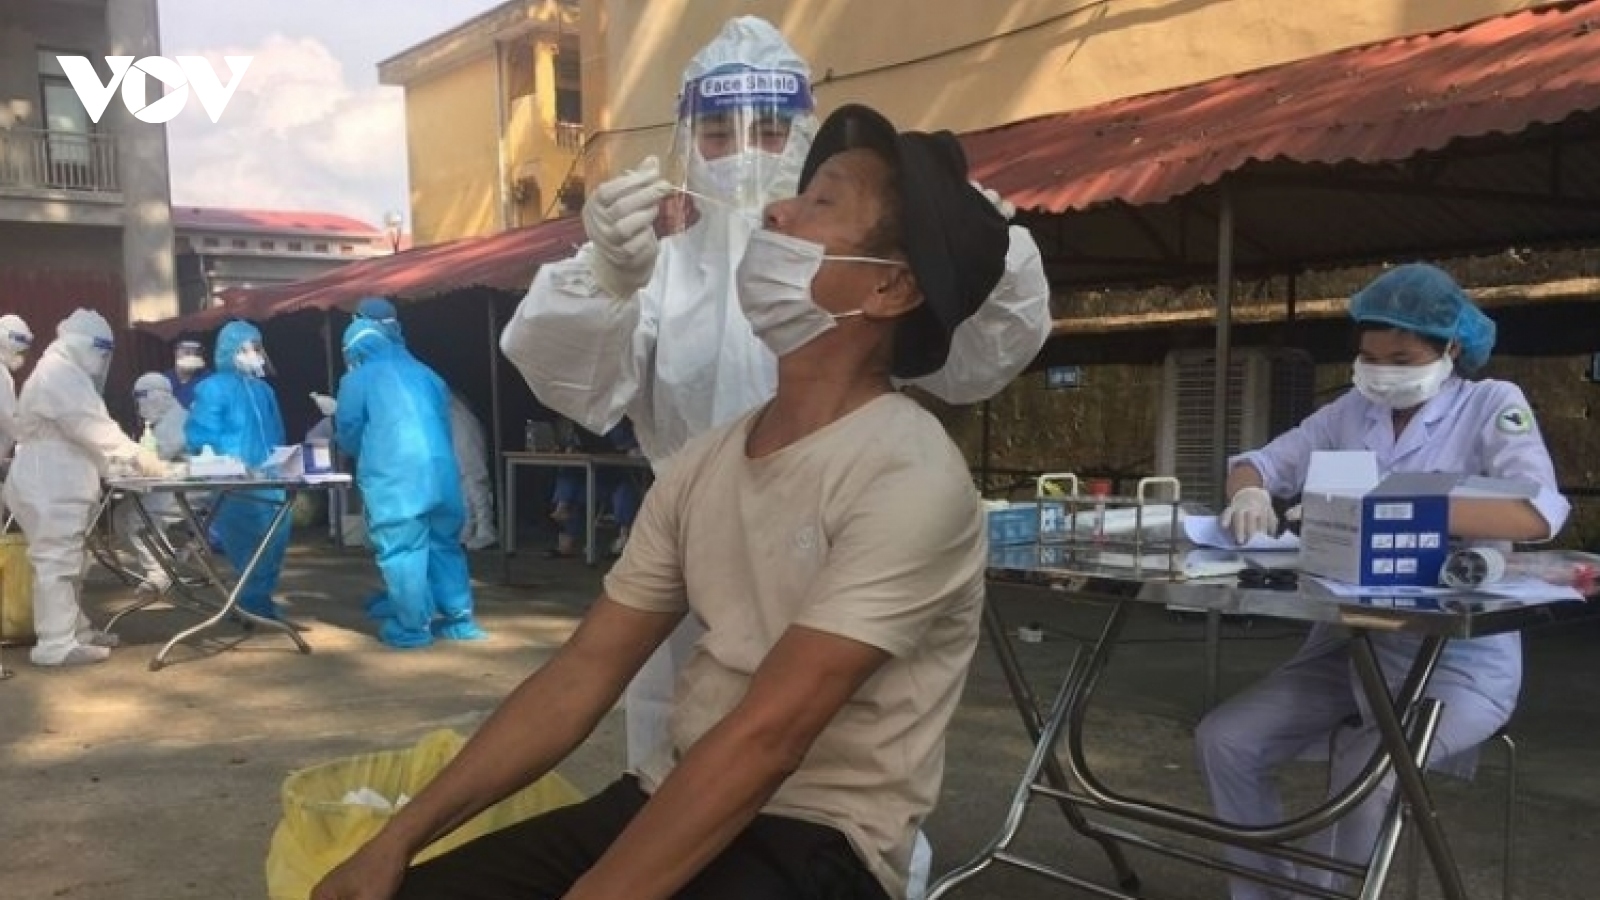 Bac Giang hotspot confirms 61 out of 91 local infections over 12 hours